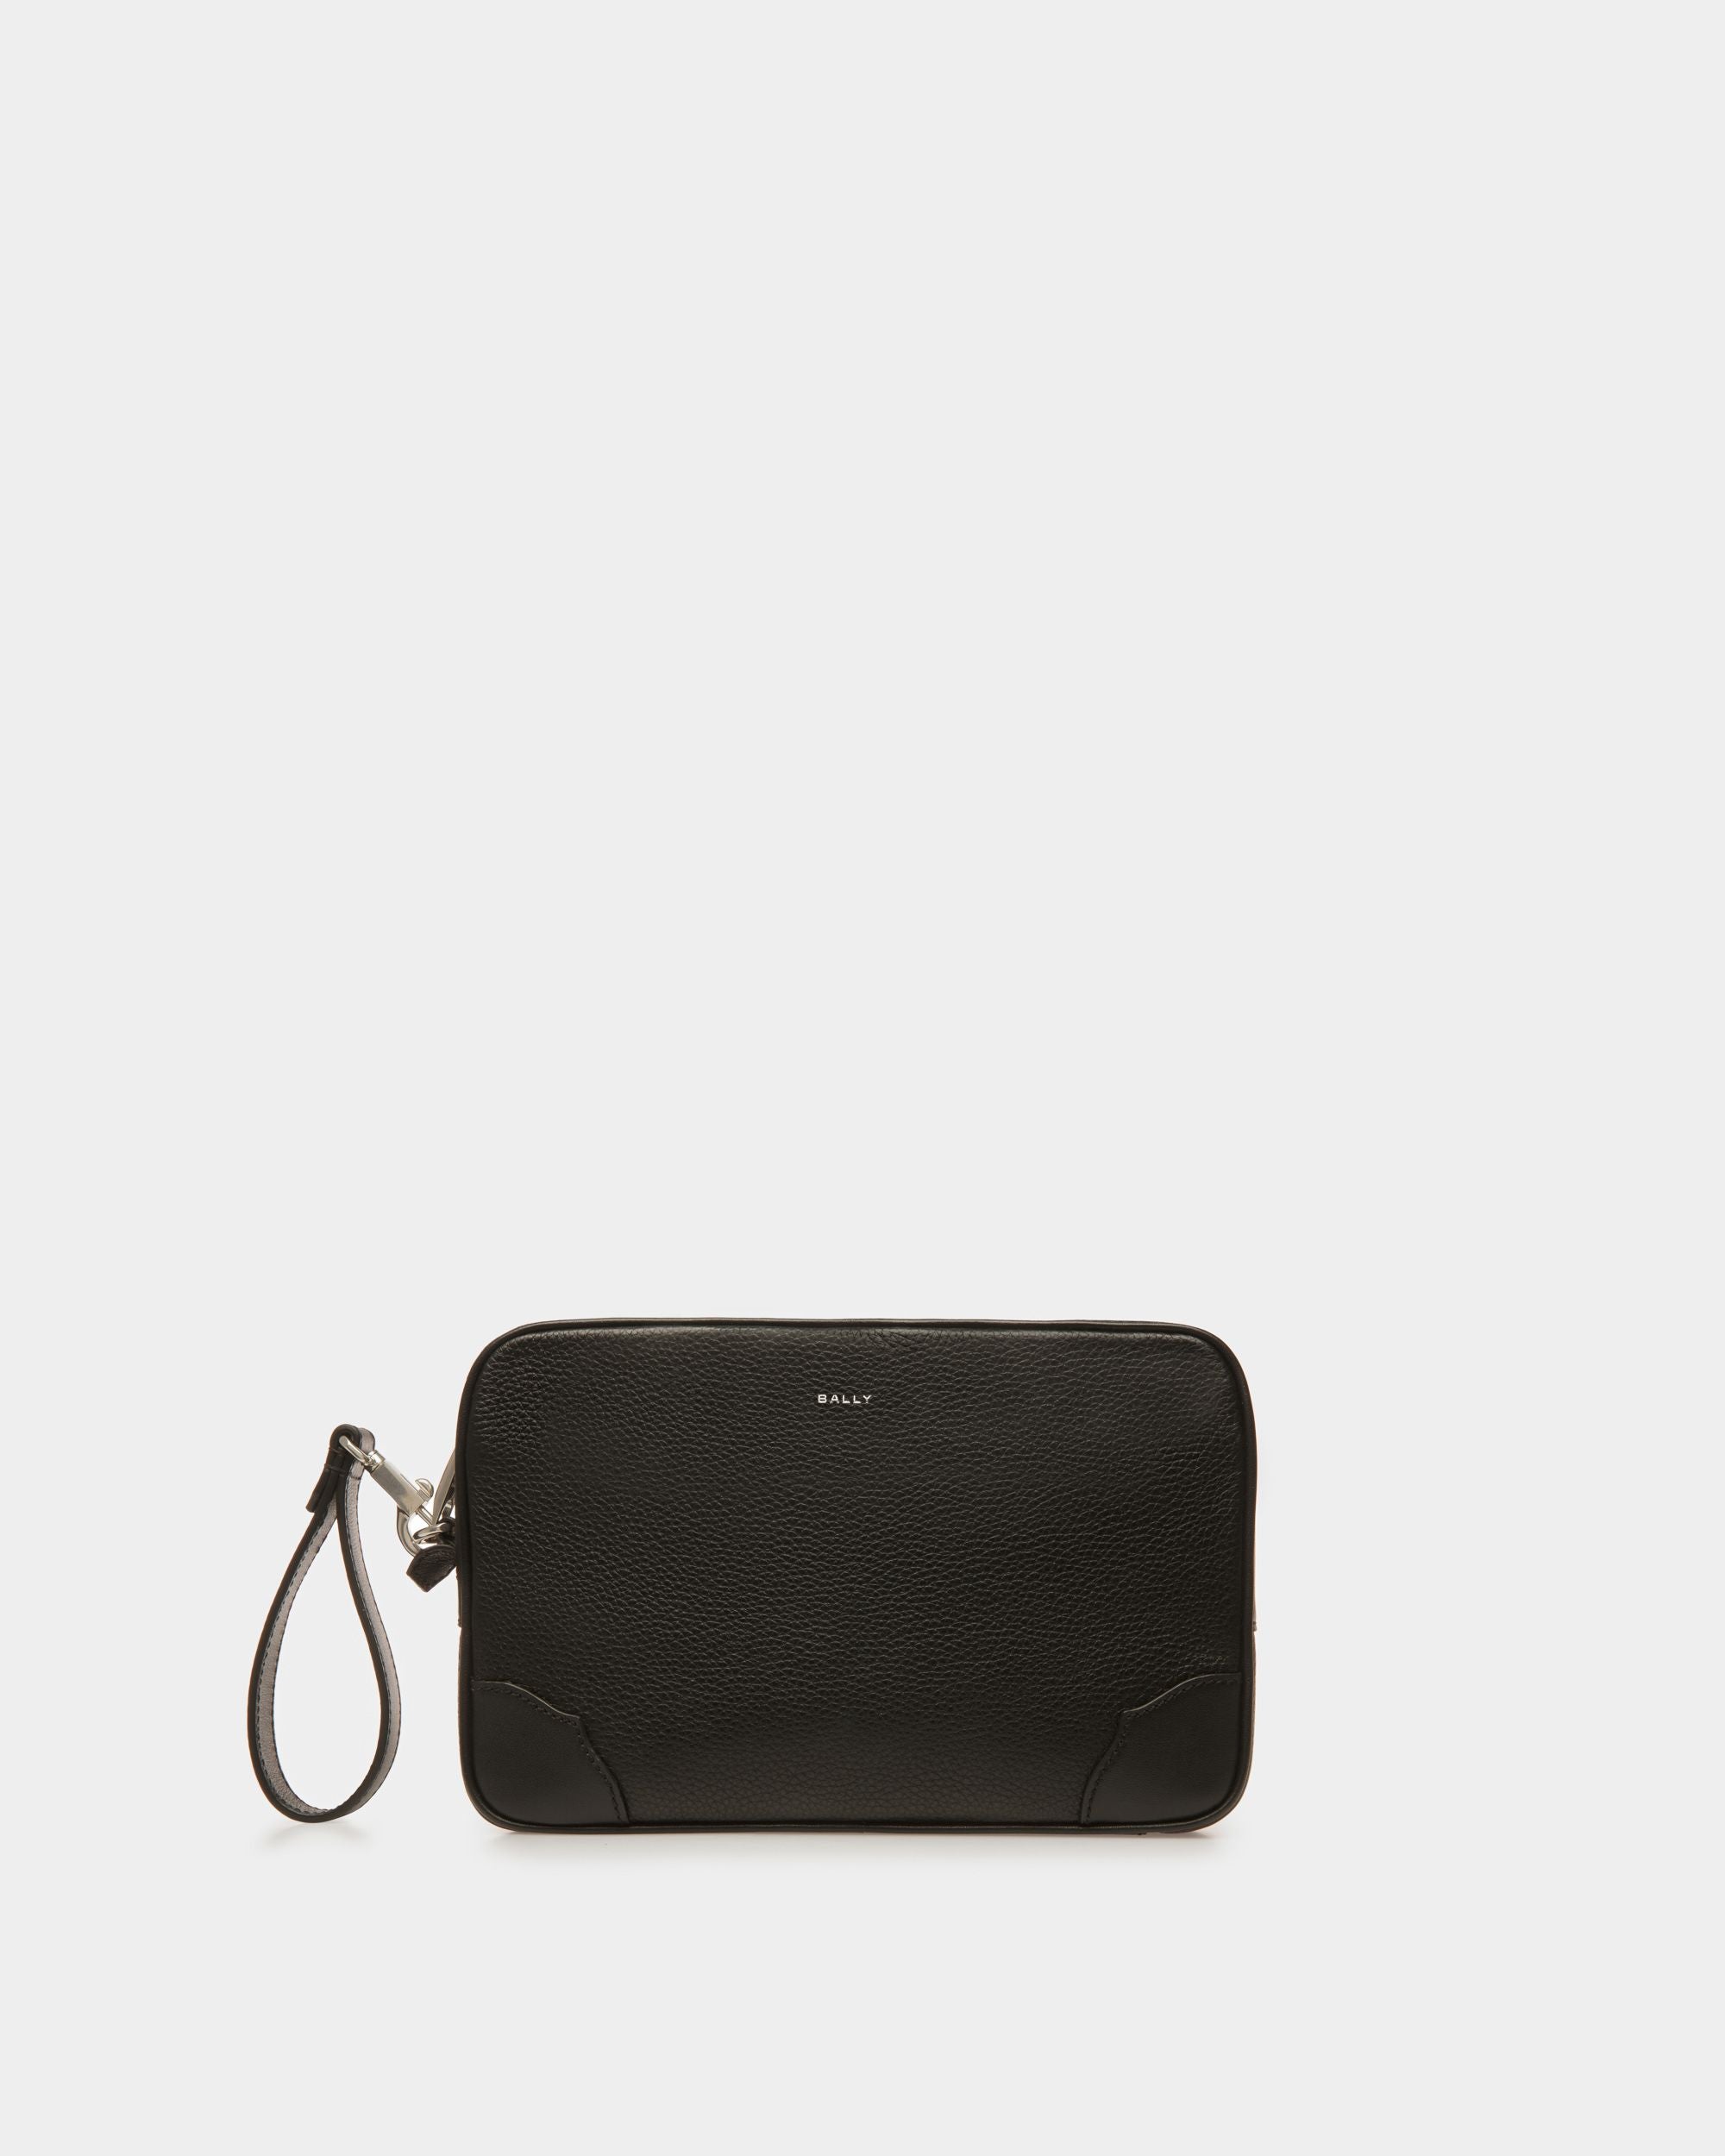 Bord Quick | Men's Clutches And Portfolios | Black Leather | Bally | Still Life Front